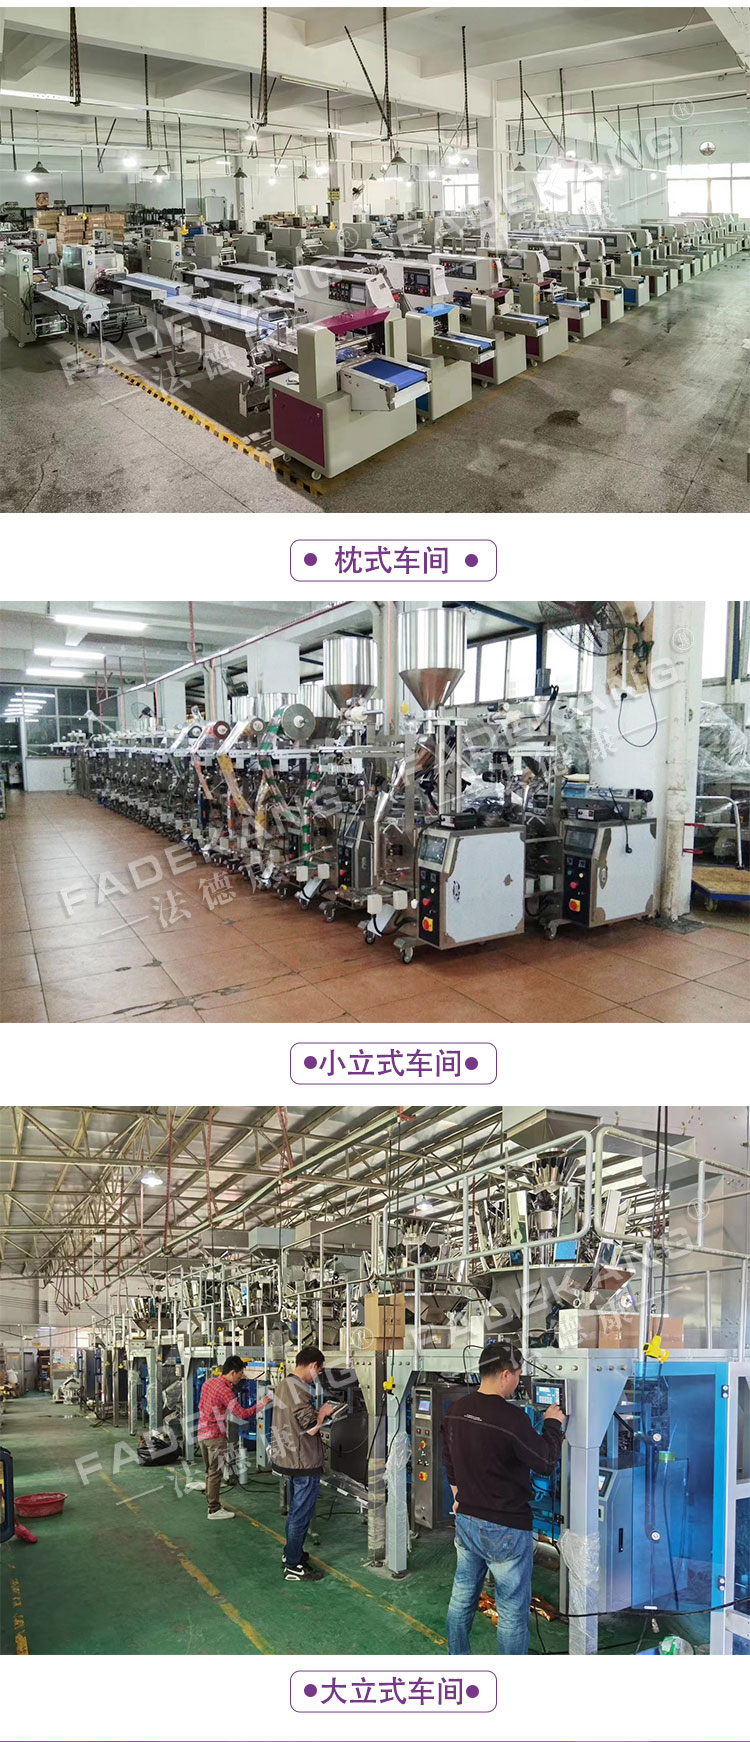 Bread and pastry pillow type packaging machine with support box, fully automatic packaging machine for frozen food, nitrogen filling and sealing machine for packaging points